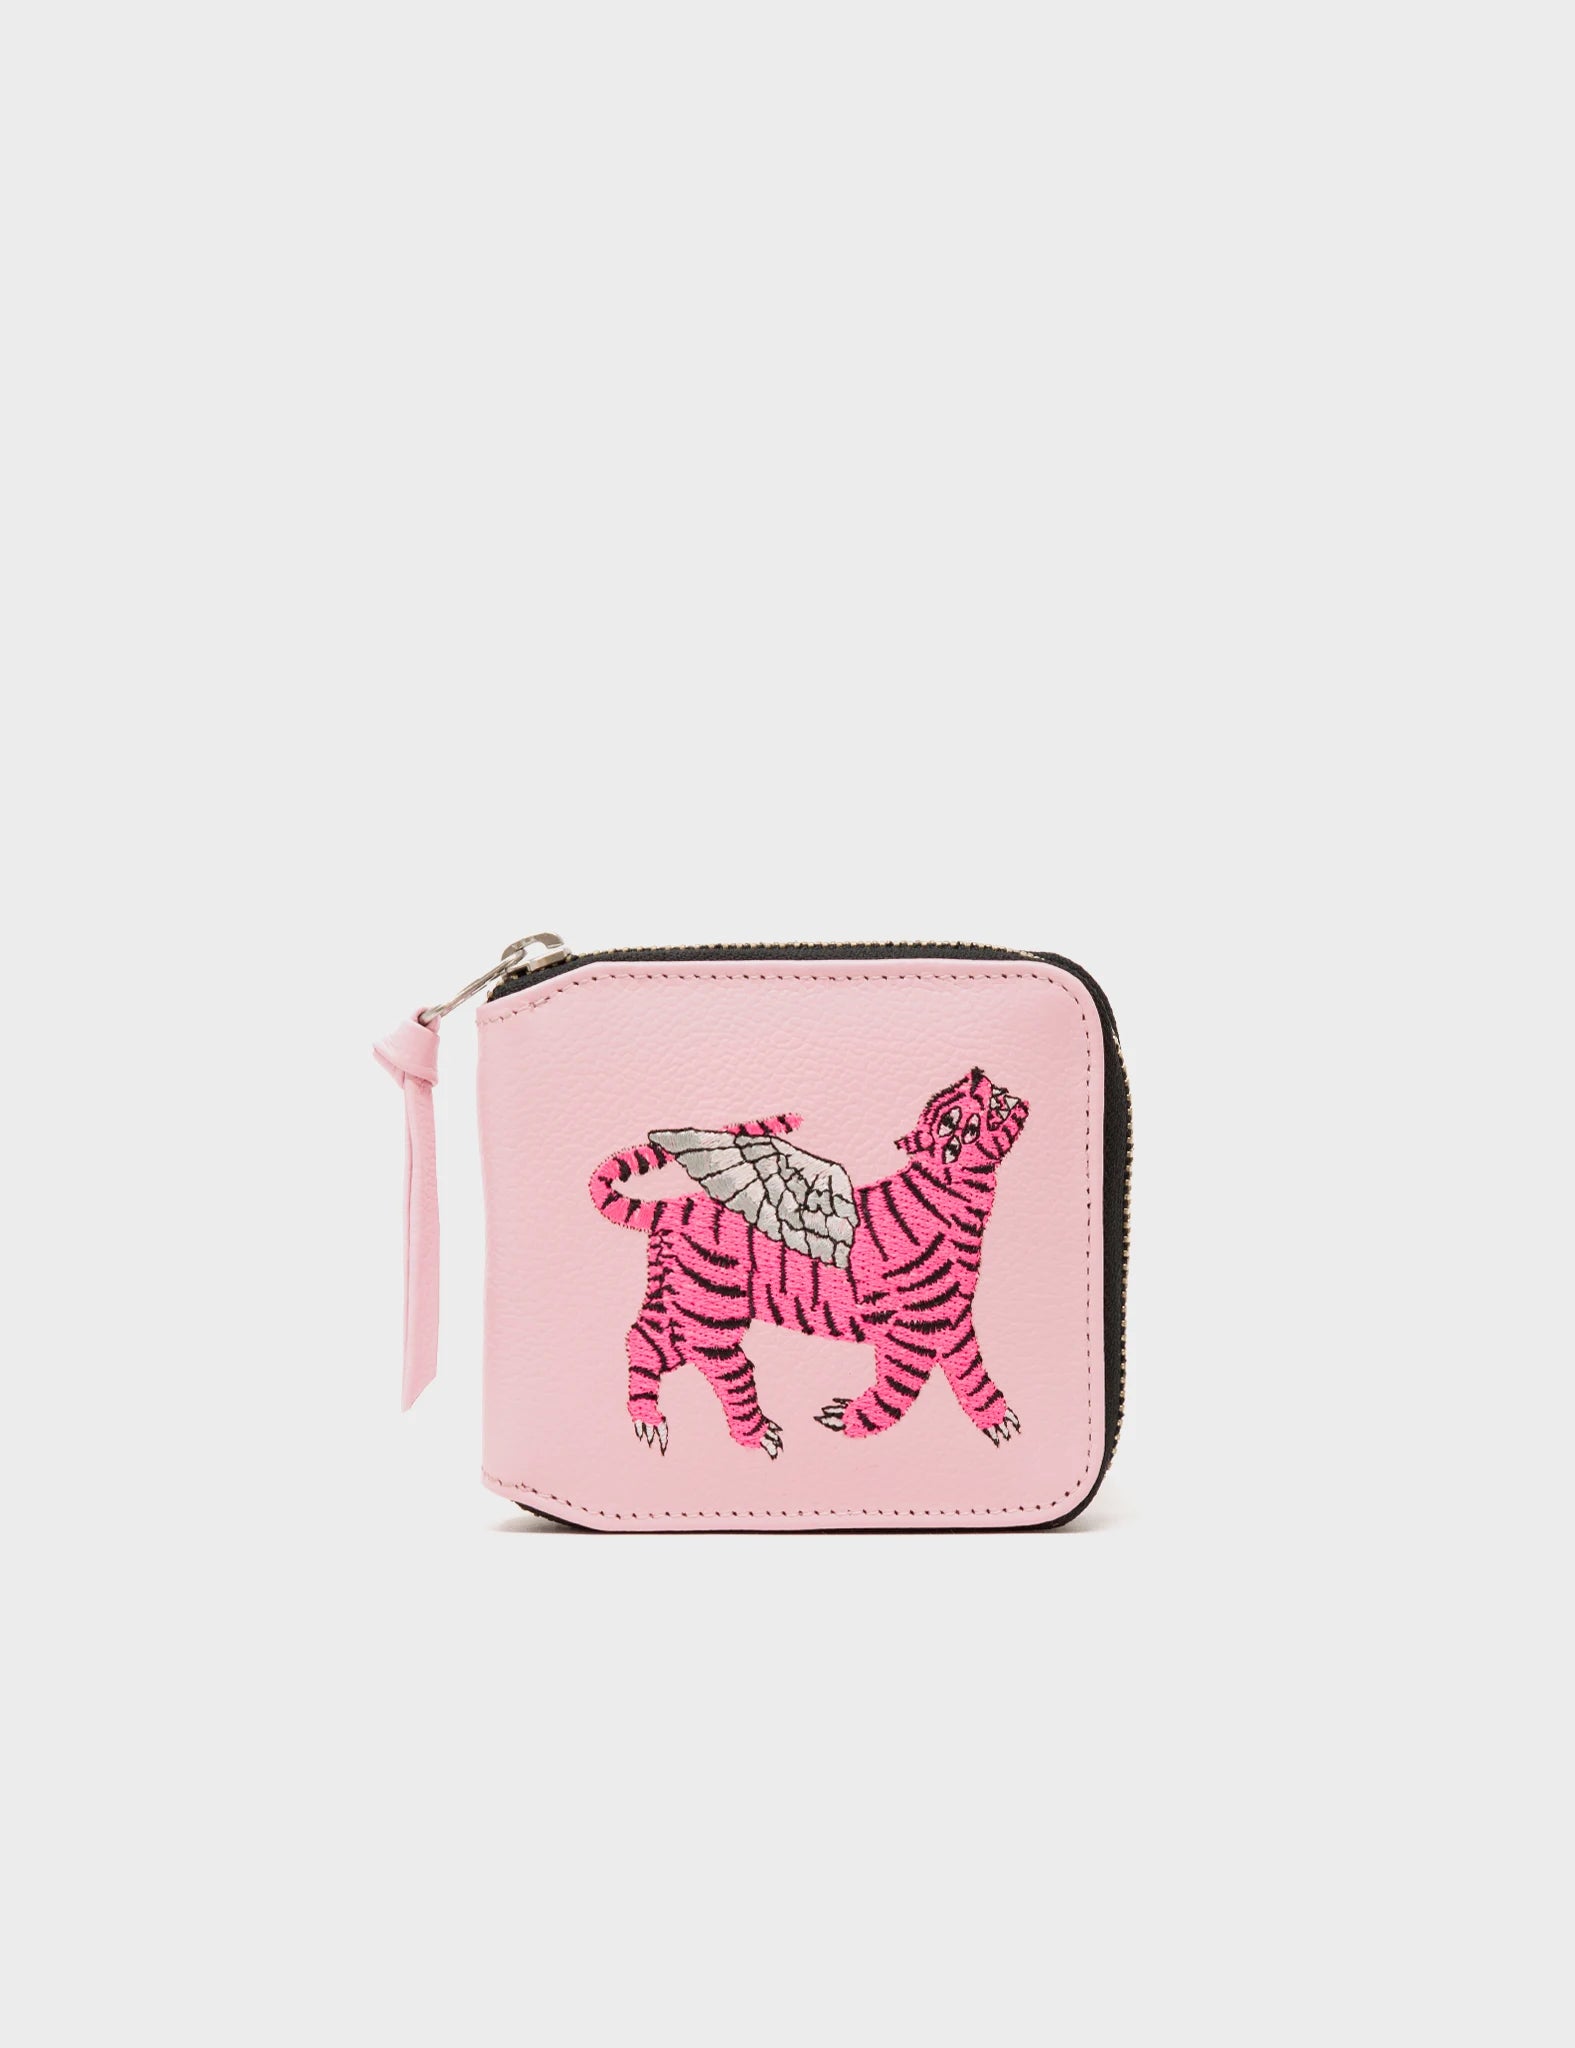 Fedor Parfait Pink And Blue Leather Wallet - Tiger Embroidery